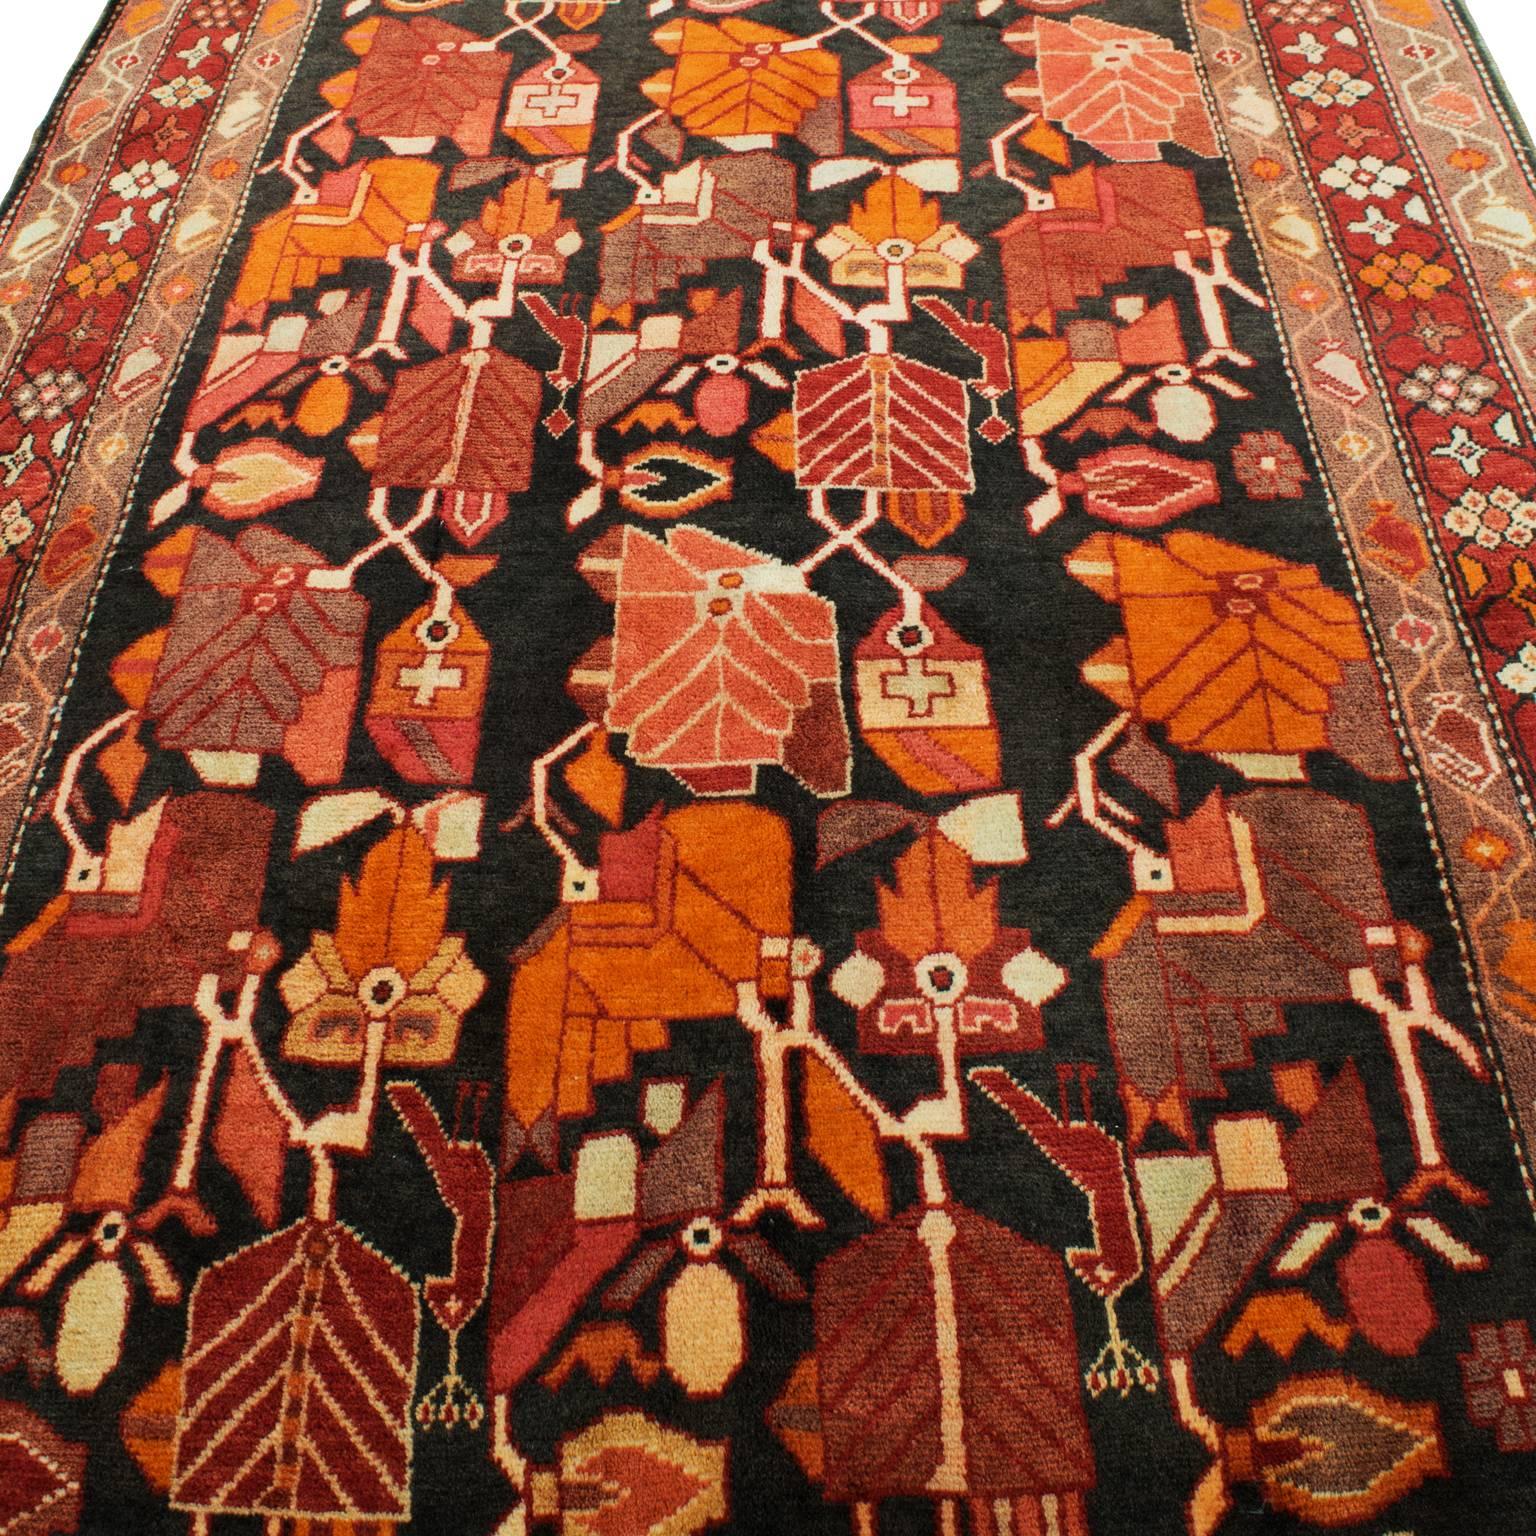 Beautiful Persian rug in a gorgeous colorway of primarily oranges, pinks and reds on black. Like new and very clean. The rug is long enough for a hallway, and large enough for an area rug. 

Rug Origin: Persian/Iran
Rug type: Bijar
Weave: